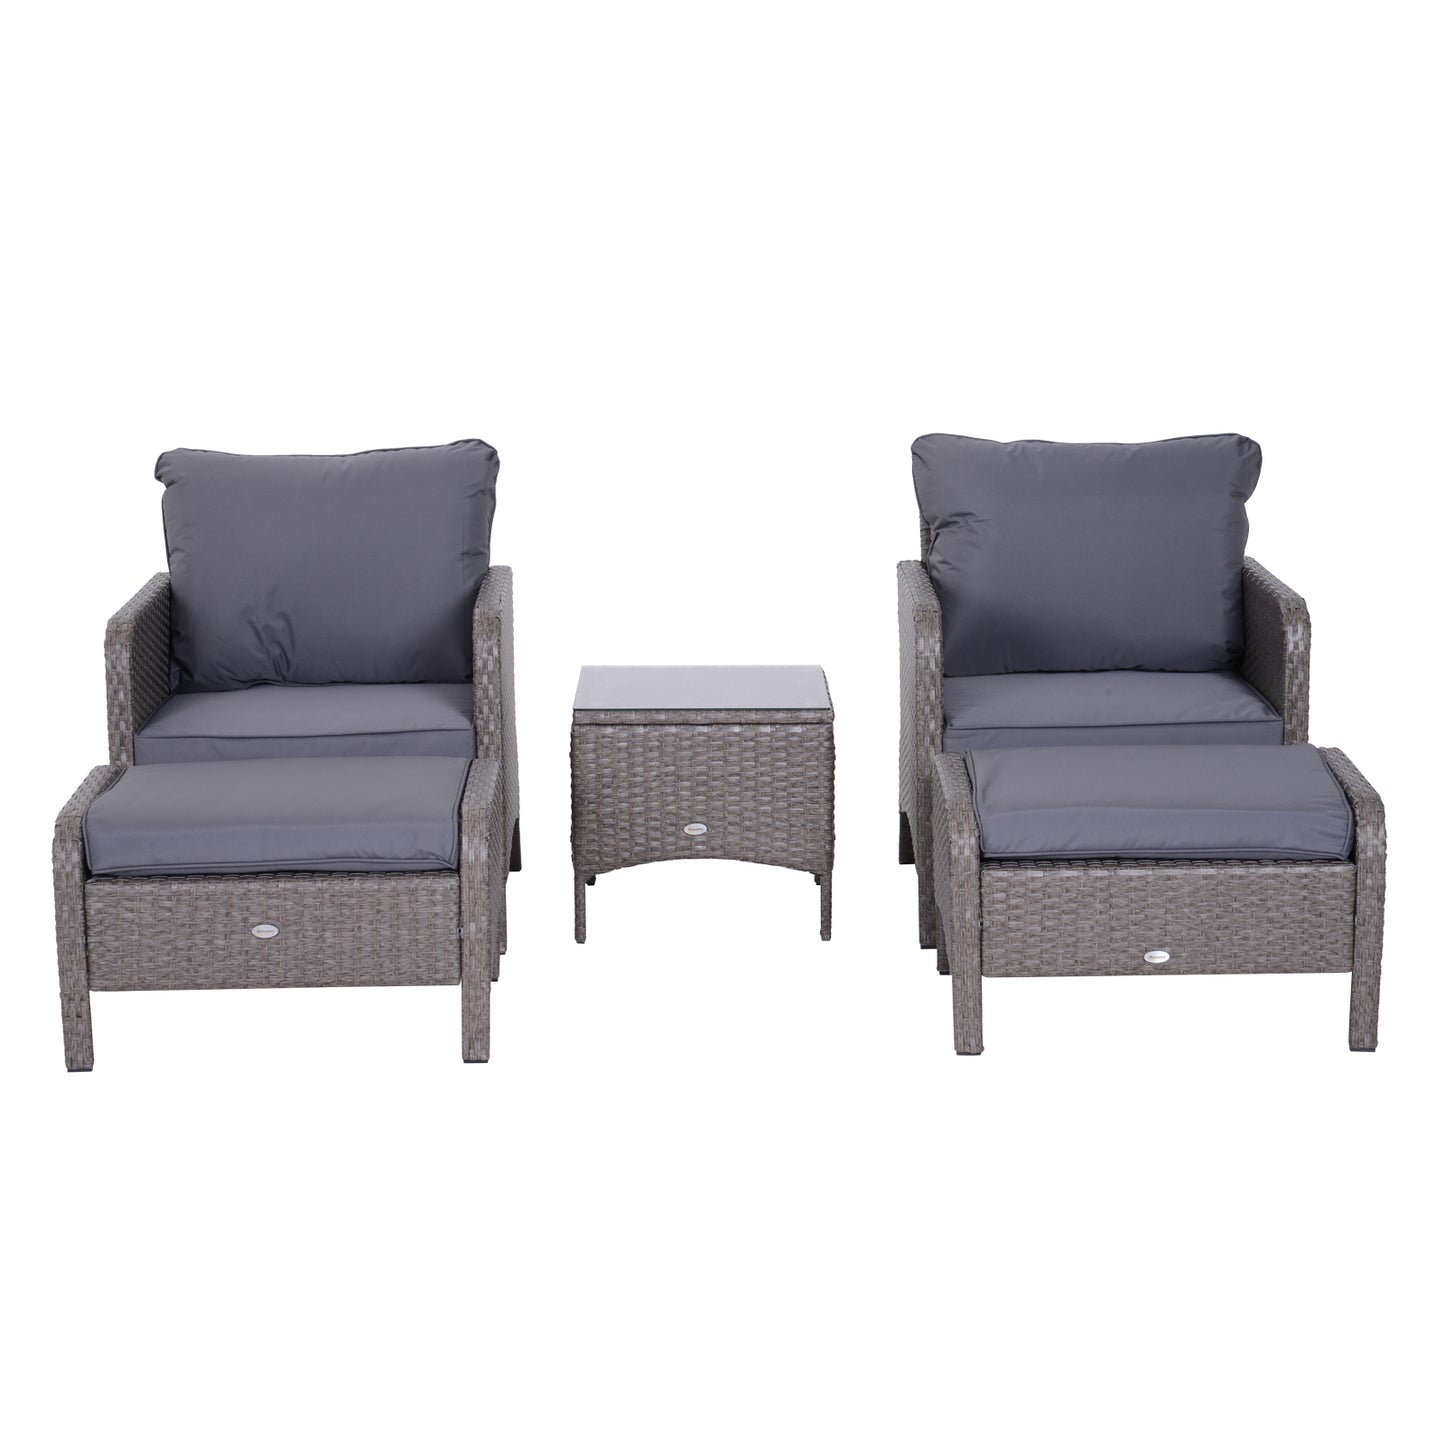 Outsunny 2 Seater Rattan Furniture Set, Steel Frame-Grey